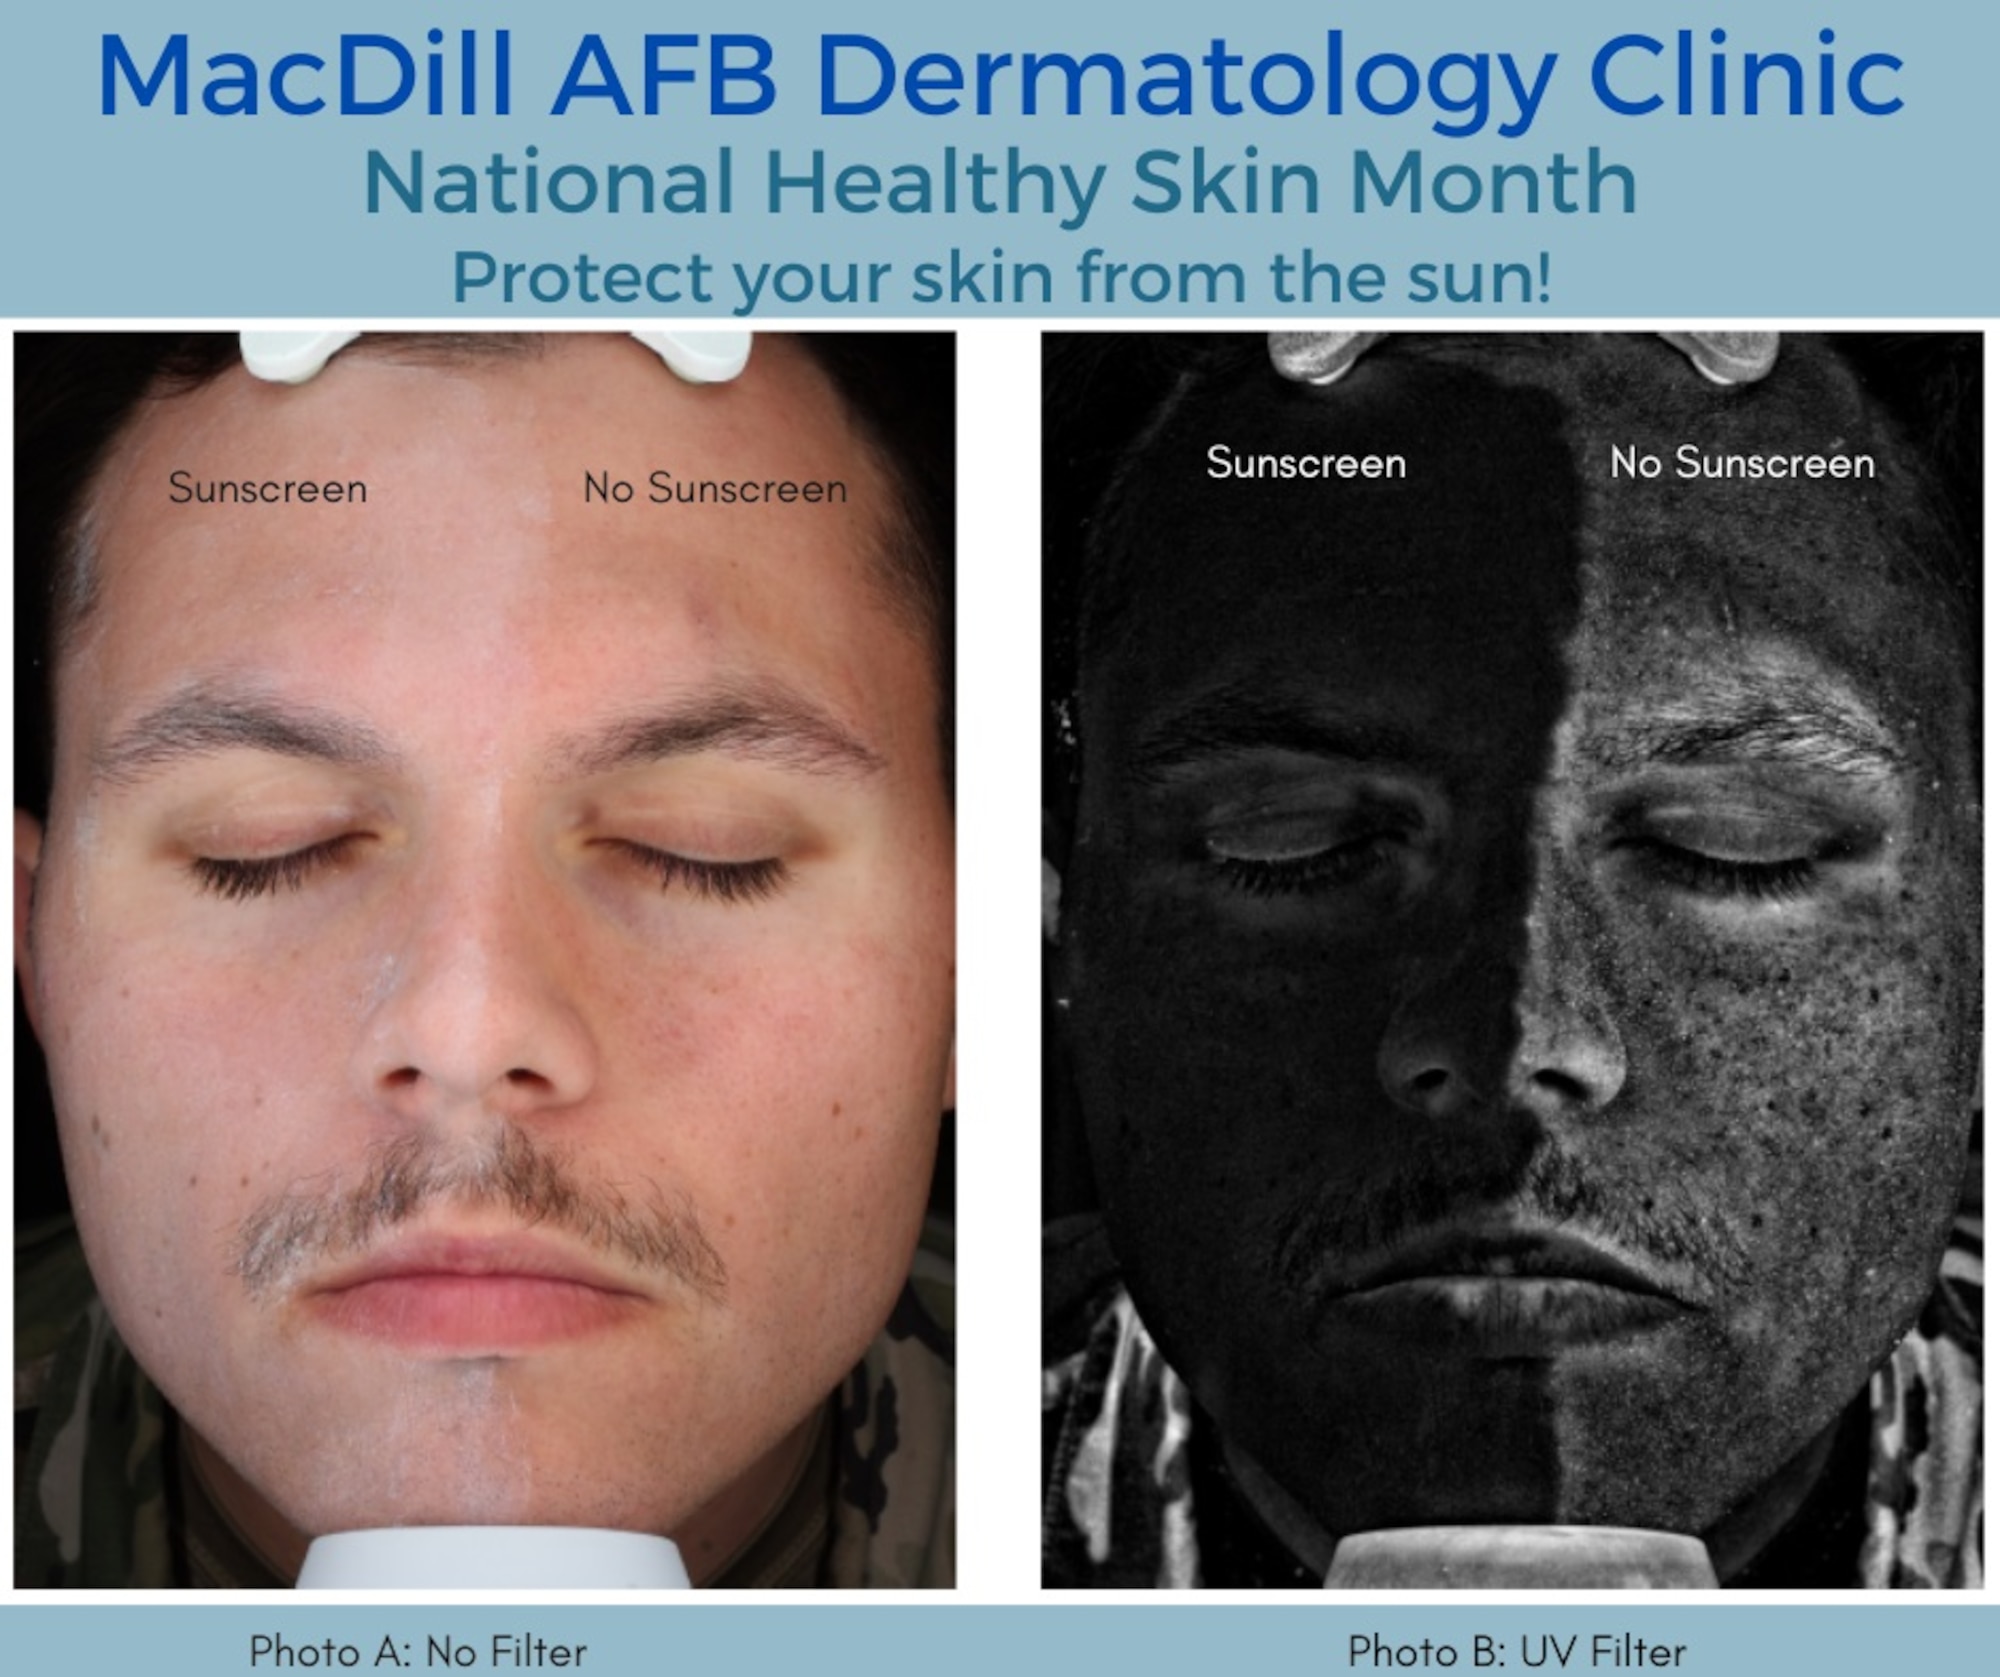 U.S. Air Force Staff Sgt. Jacob Levering, 6th Healthcare Operations Squadron, models the importance of sunscreen. Photo A, left, demonstrates his skin with and without sunscreen application. Photo B, right, is the same photo with an ultraviolet filter applied. Photo B demonstrates the UV-blocking abilities of his sunscreen on, the right half of his face, compared to the UV penetration without sunscreen on, the left half of his face. (U.S. Air Force graphic)